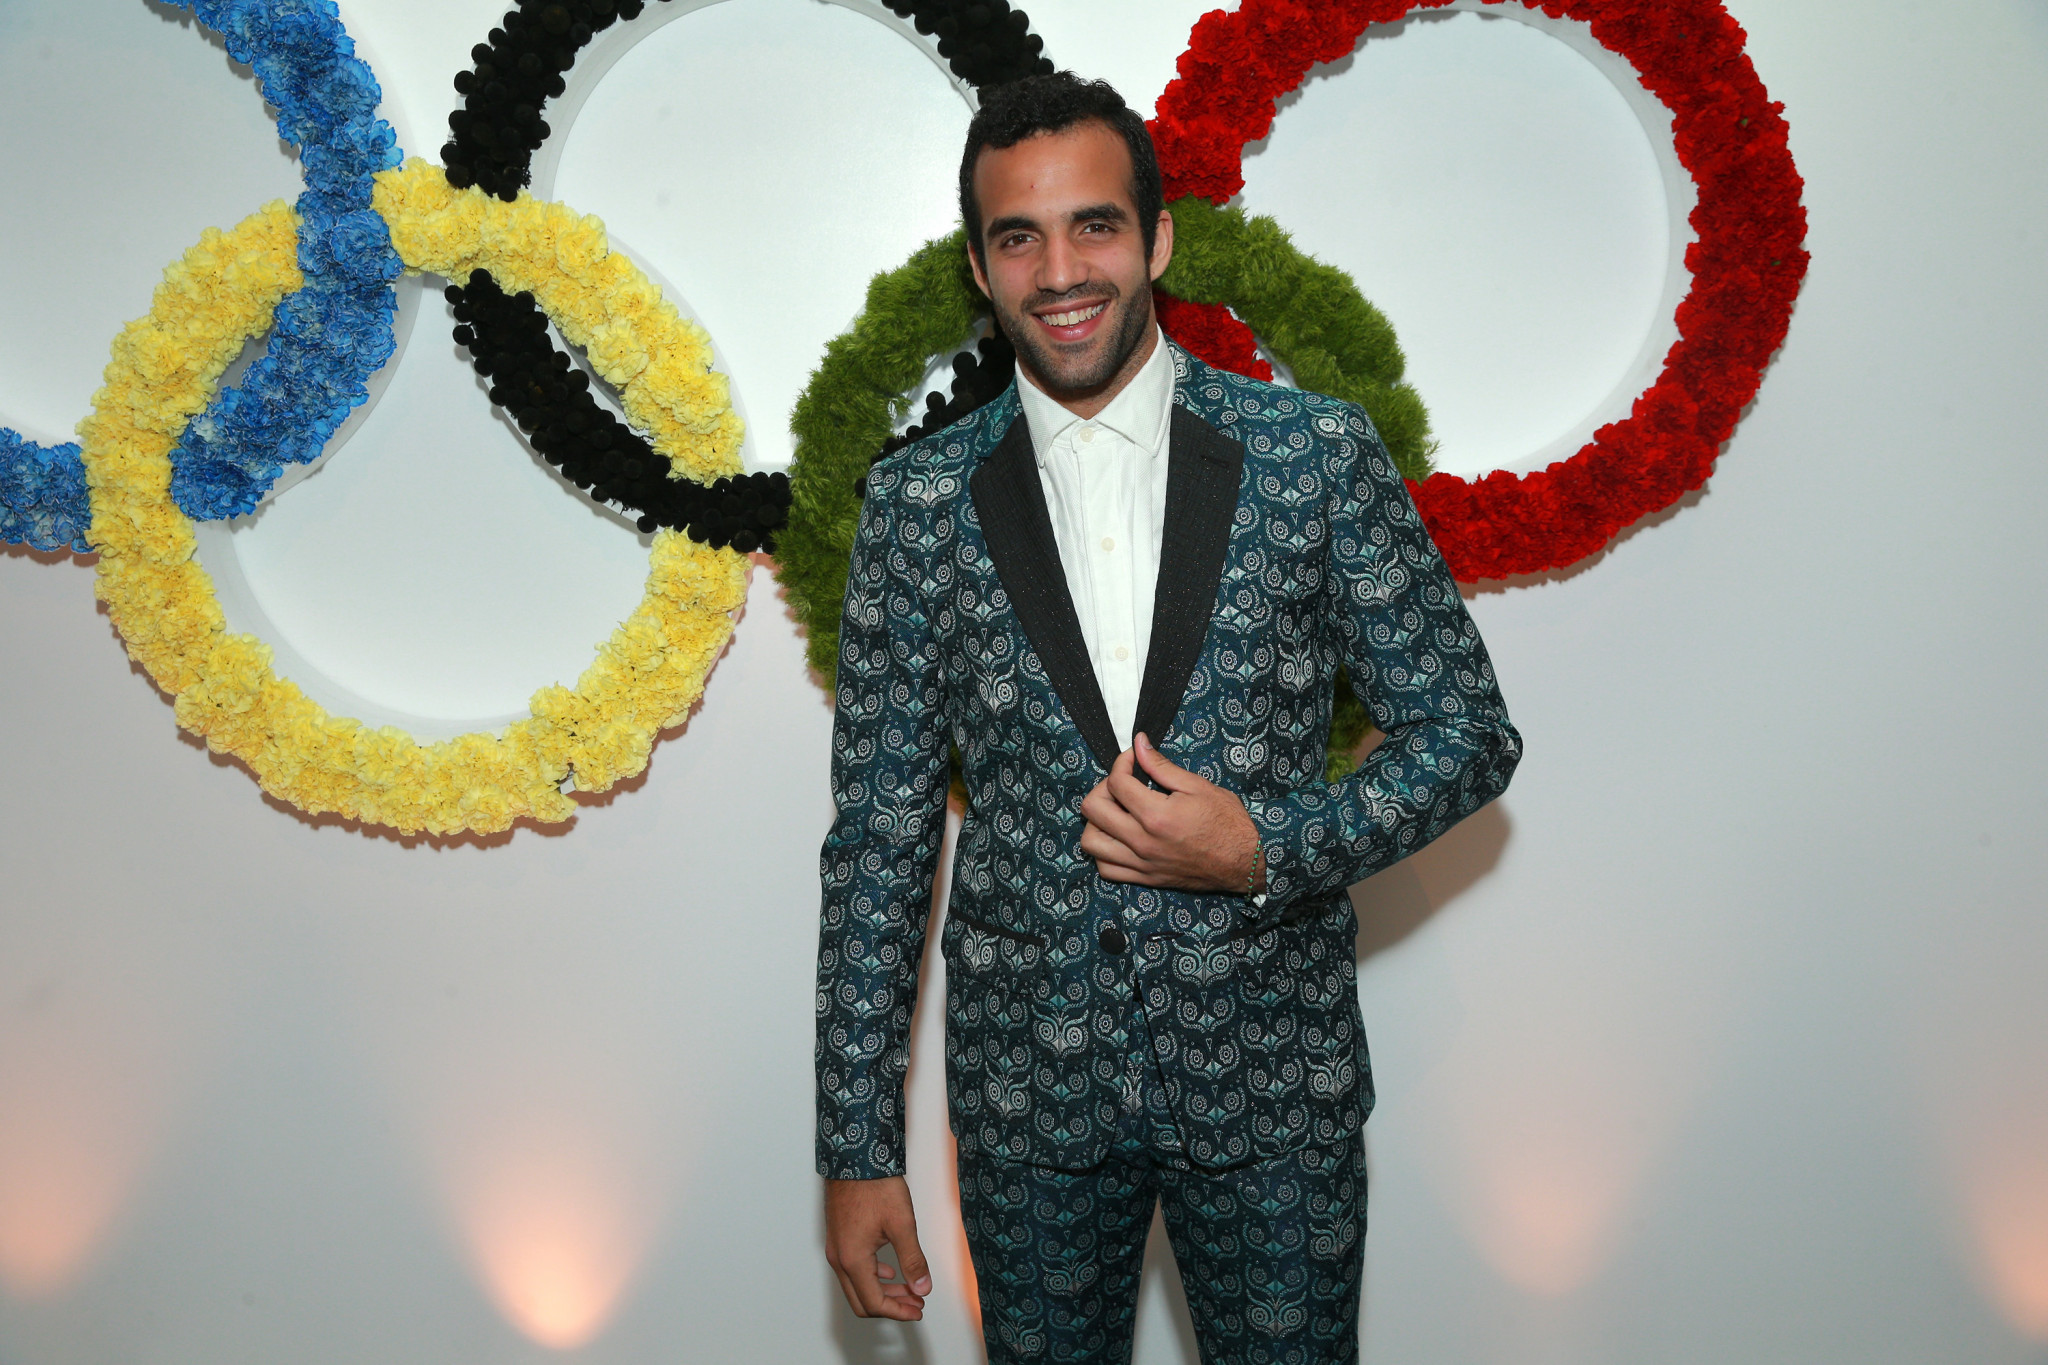 Danell Leyva is one of the role models named ©Getty Images